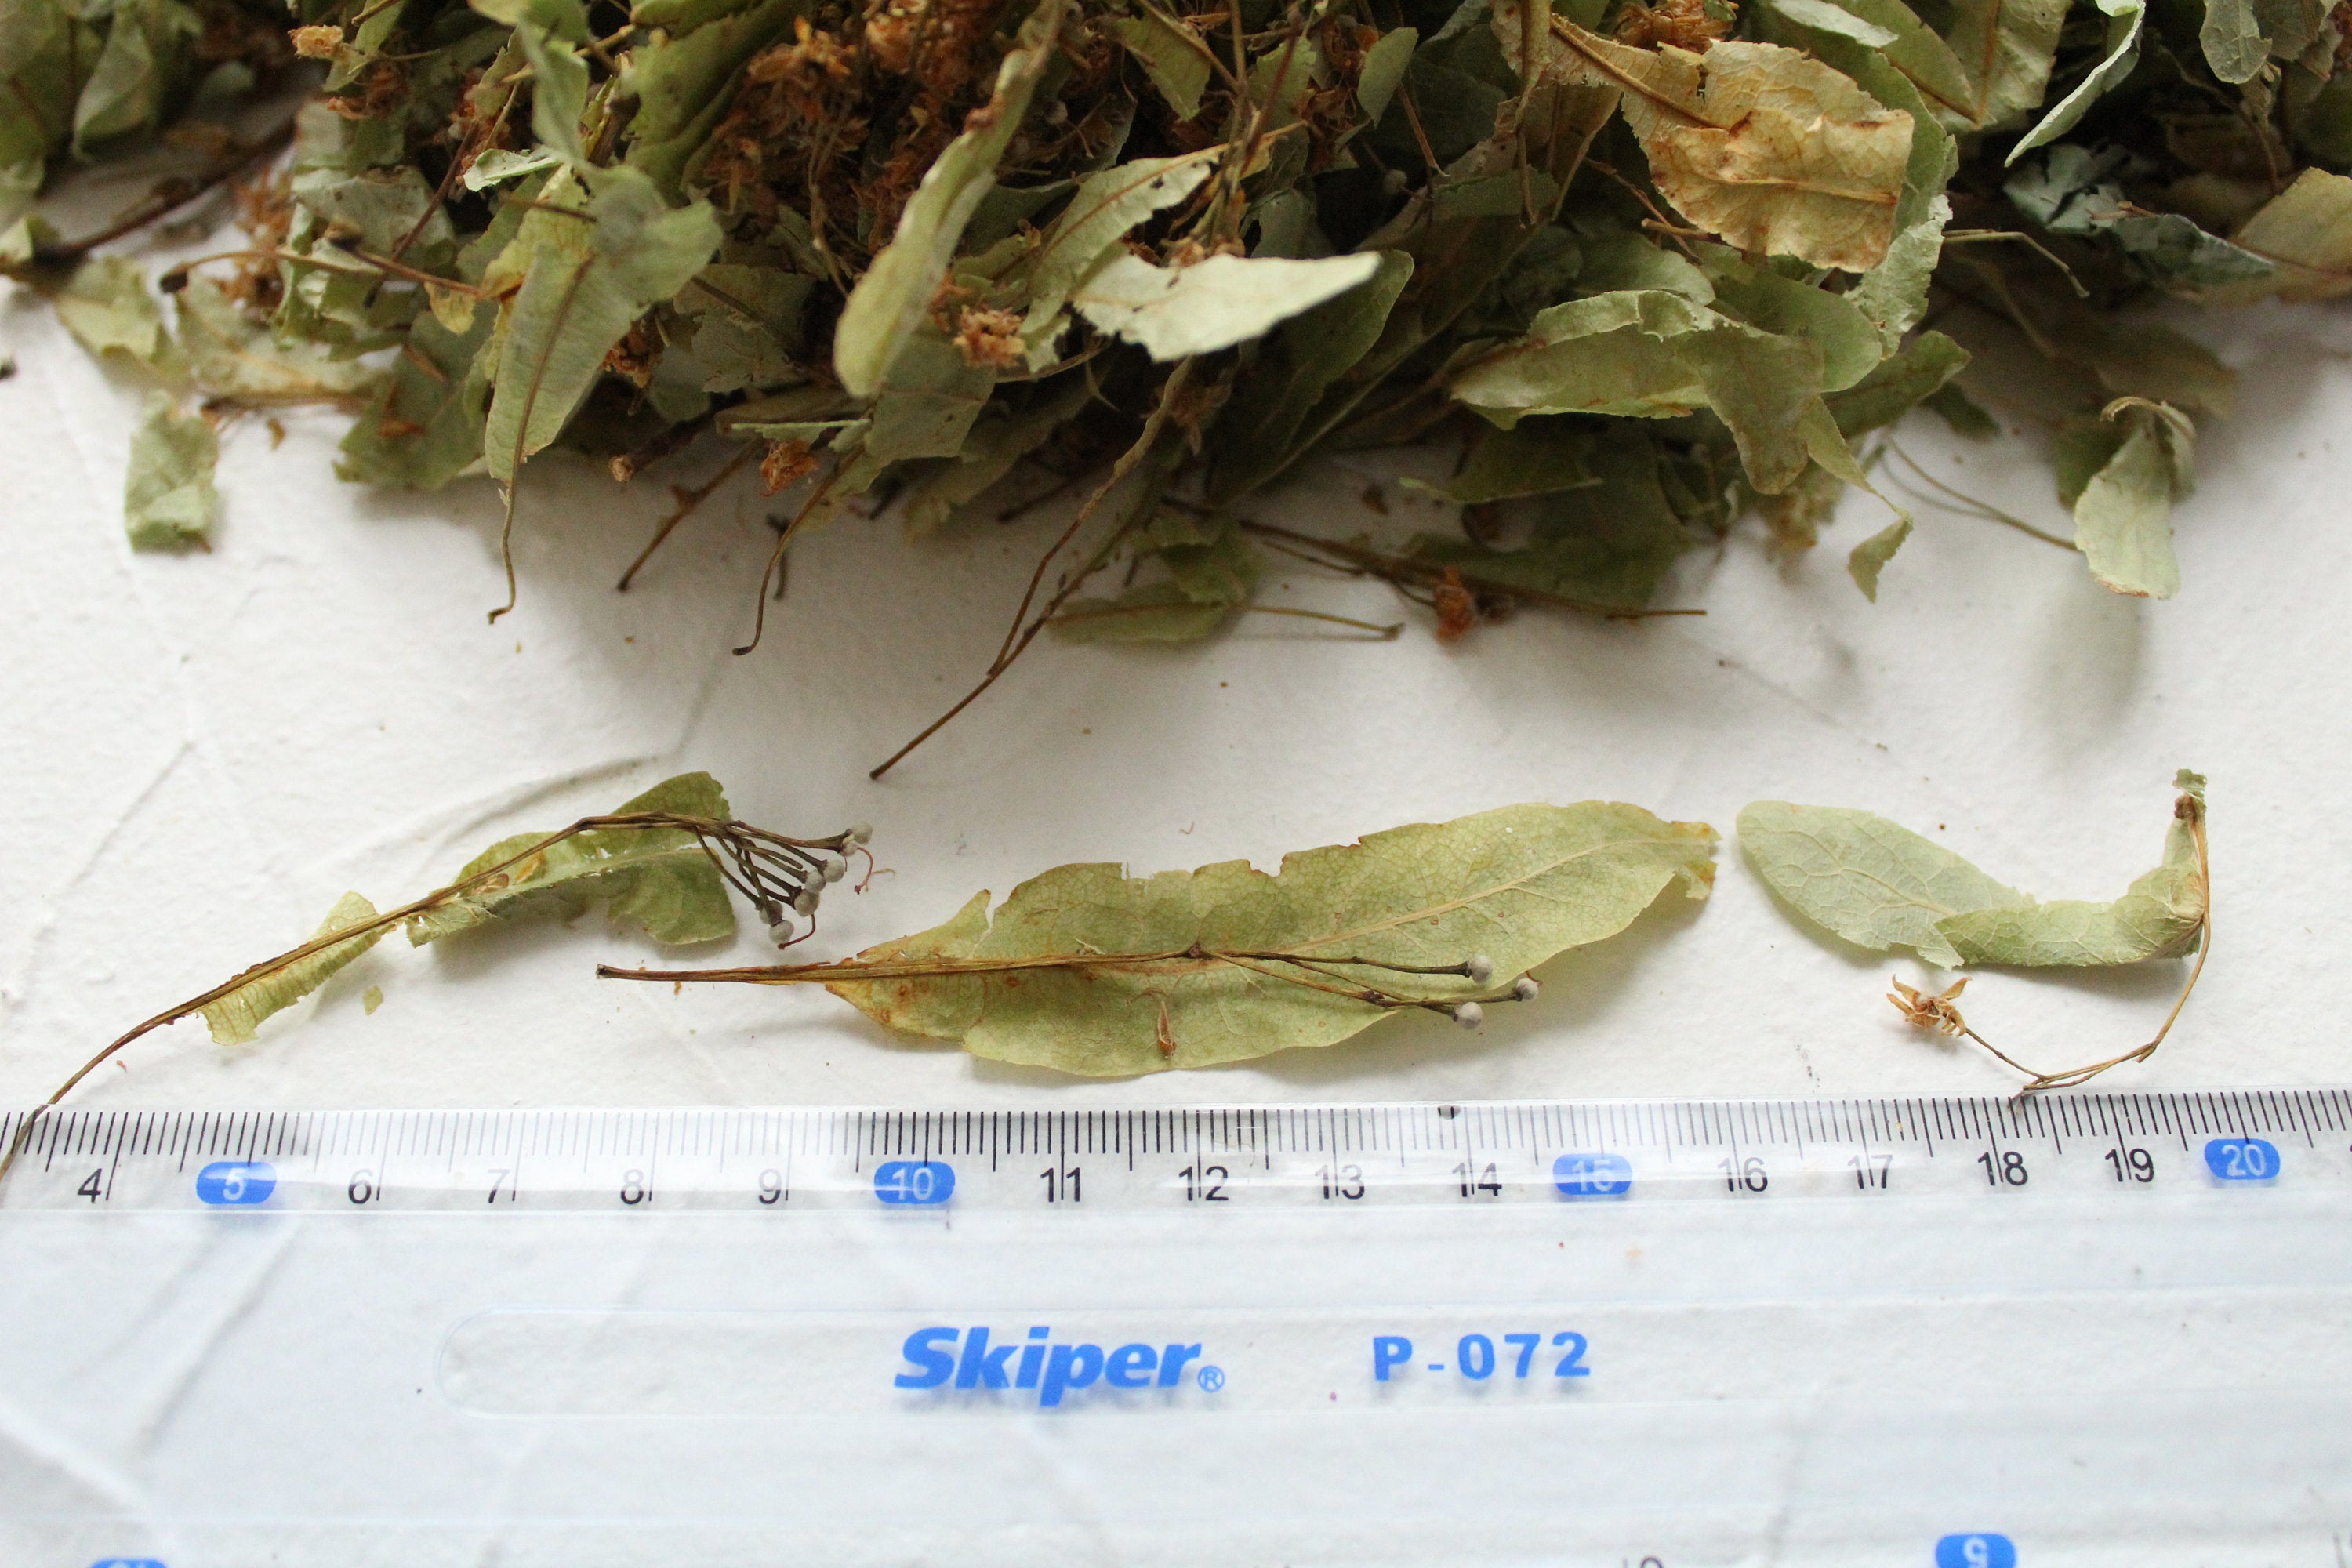 Handpicked Linden flowers, Dried, Not cut, High Quality, Natural, Organic, Biodegraddable, Craft, OZ